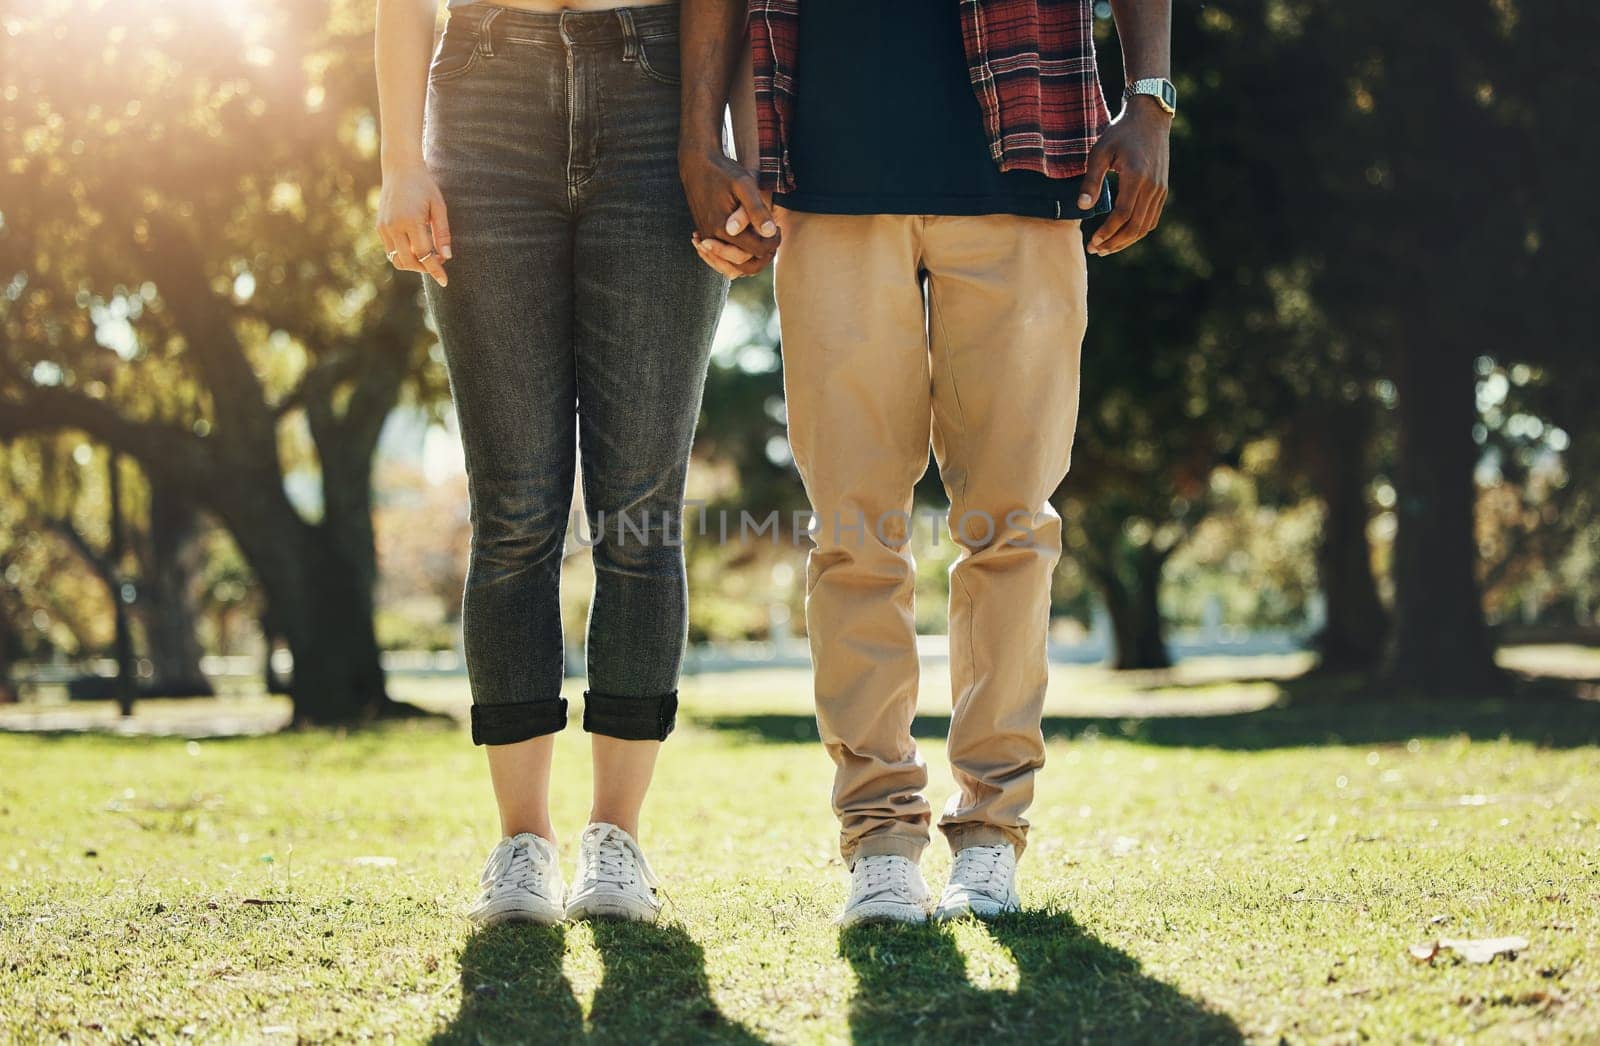 Love, holding hands and shoes of interracial couple in park for calm, freedom or support. Relax, happy and peace with feet of black man and woman standing in grass field for nature, spring or bonding by YuriArcurs